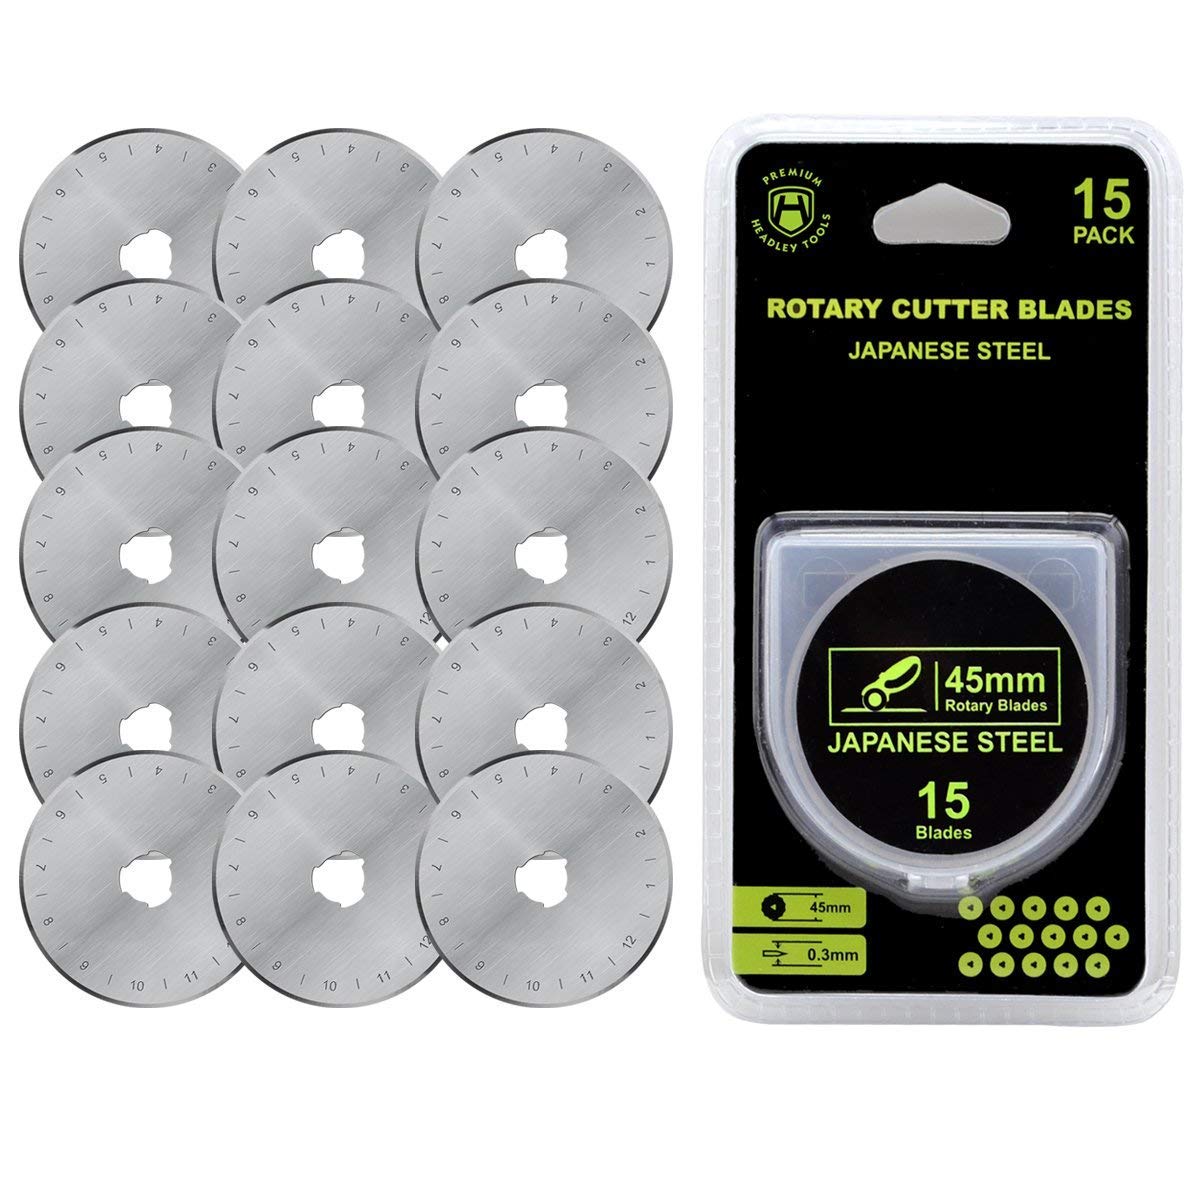 HEADLEY TOOLS 45mm Rotary Cutter Blades 15 Pack Fits Olfa, Fiskars,  Replacement Rotary Blade for Arts